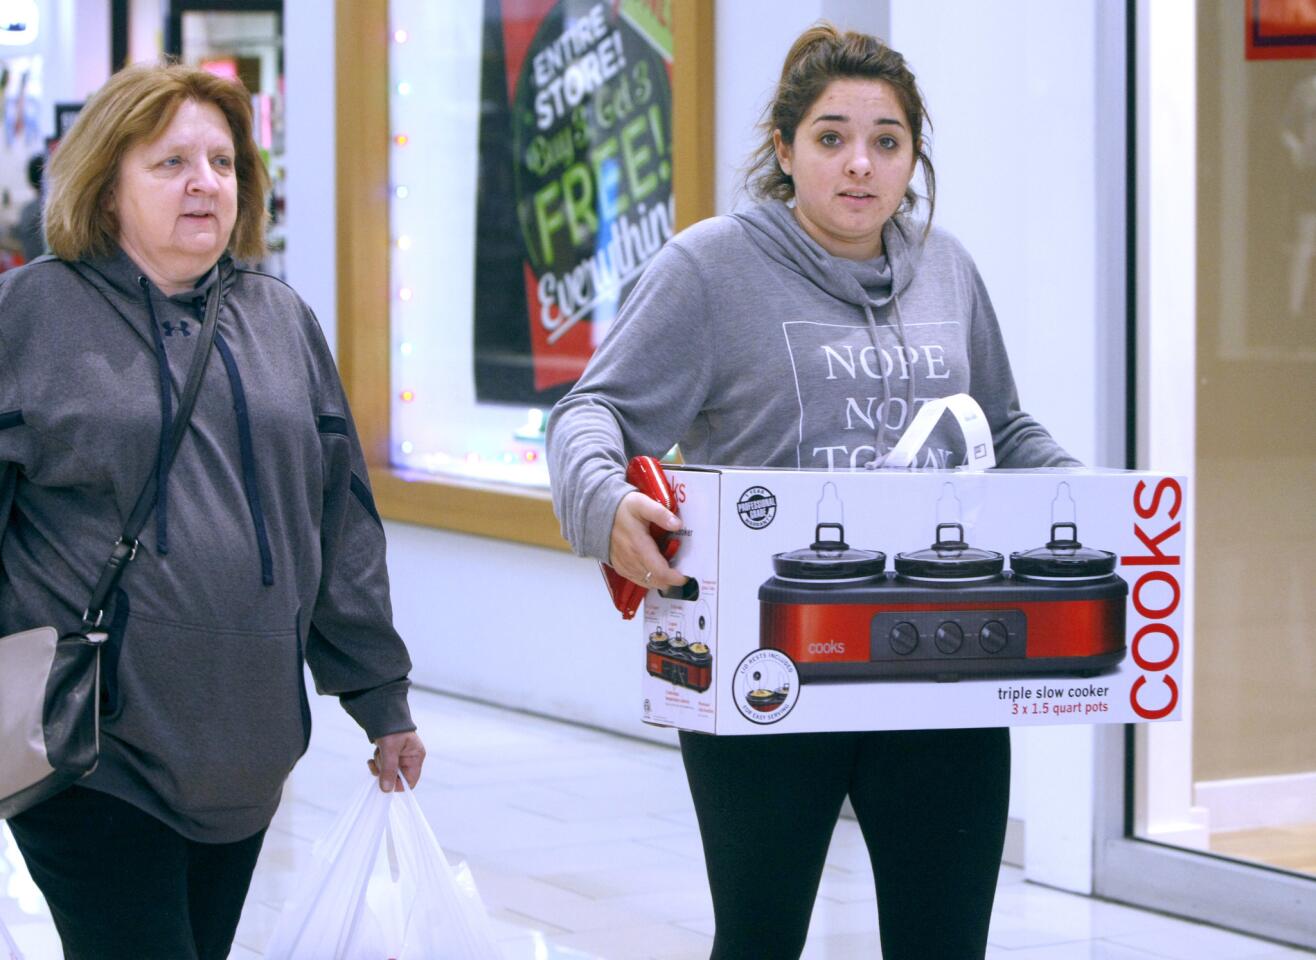 Photo Gallery: Black Friday shopping at the Glendale Galleria